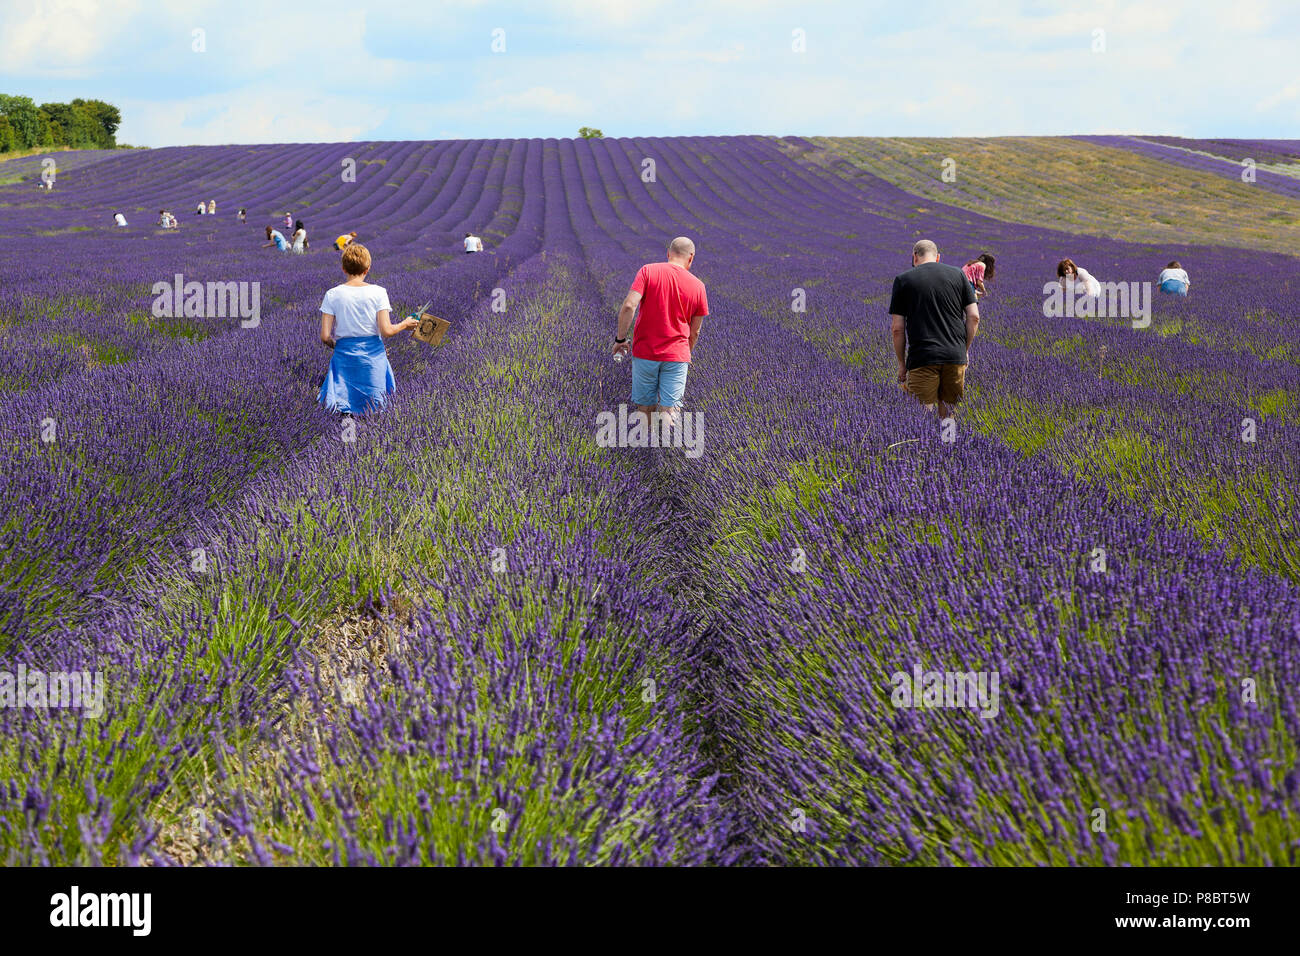 Lavender farm in Hitchin, UK, with visitors, summer Stock Photo